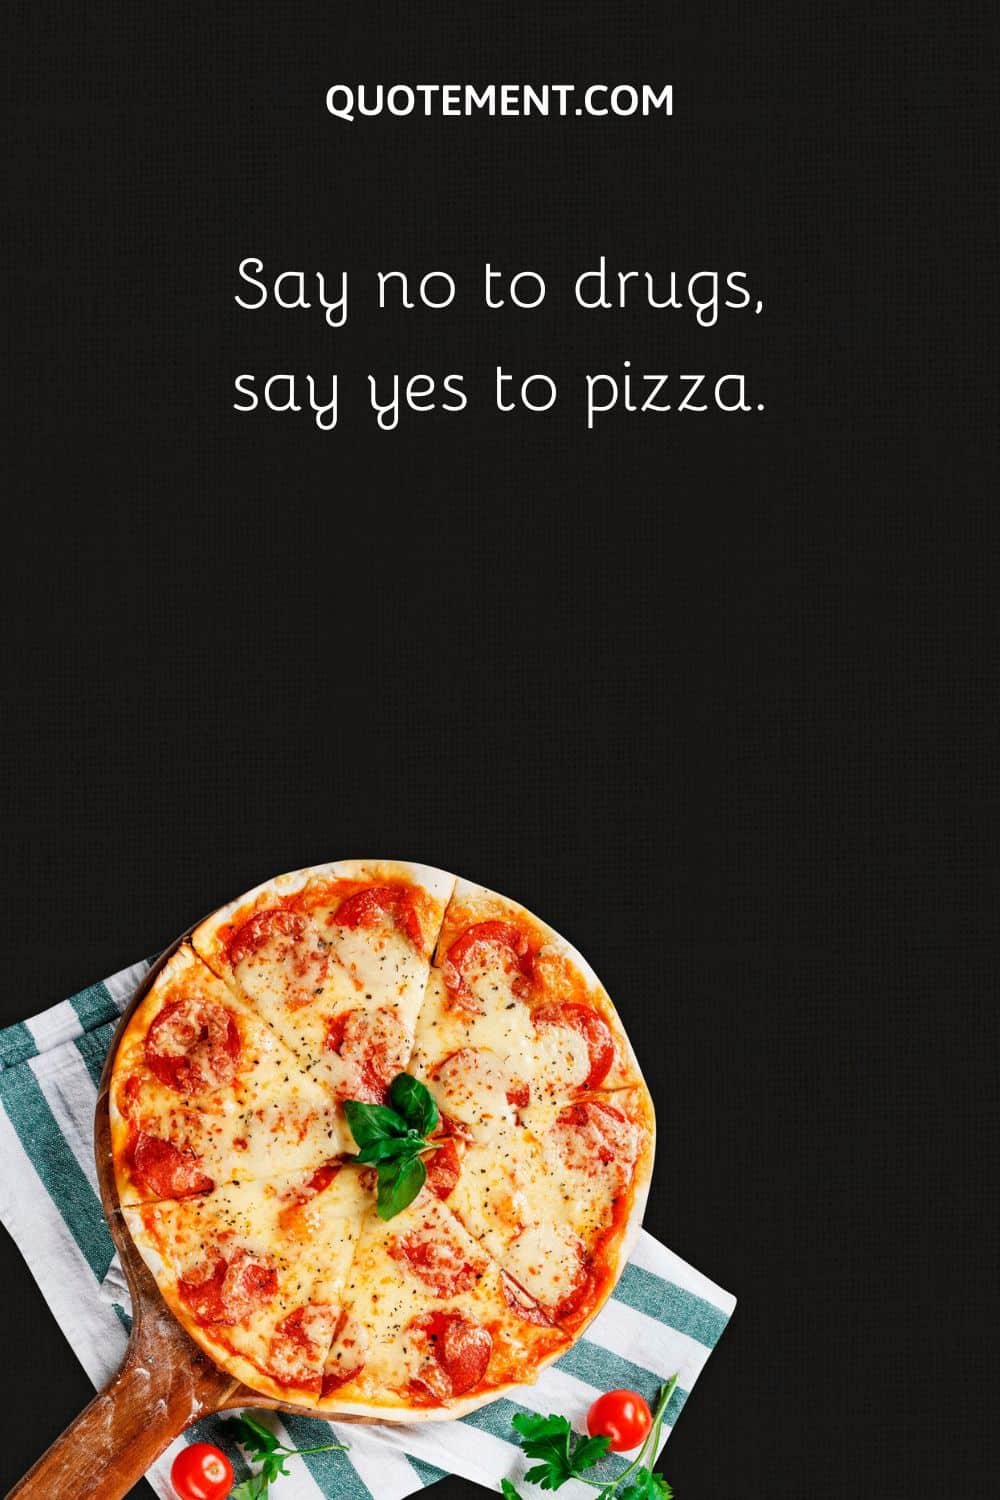 Say no to drugs, say yes to pizza